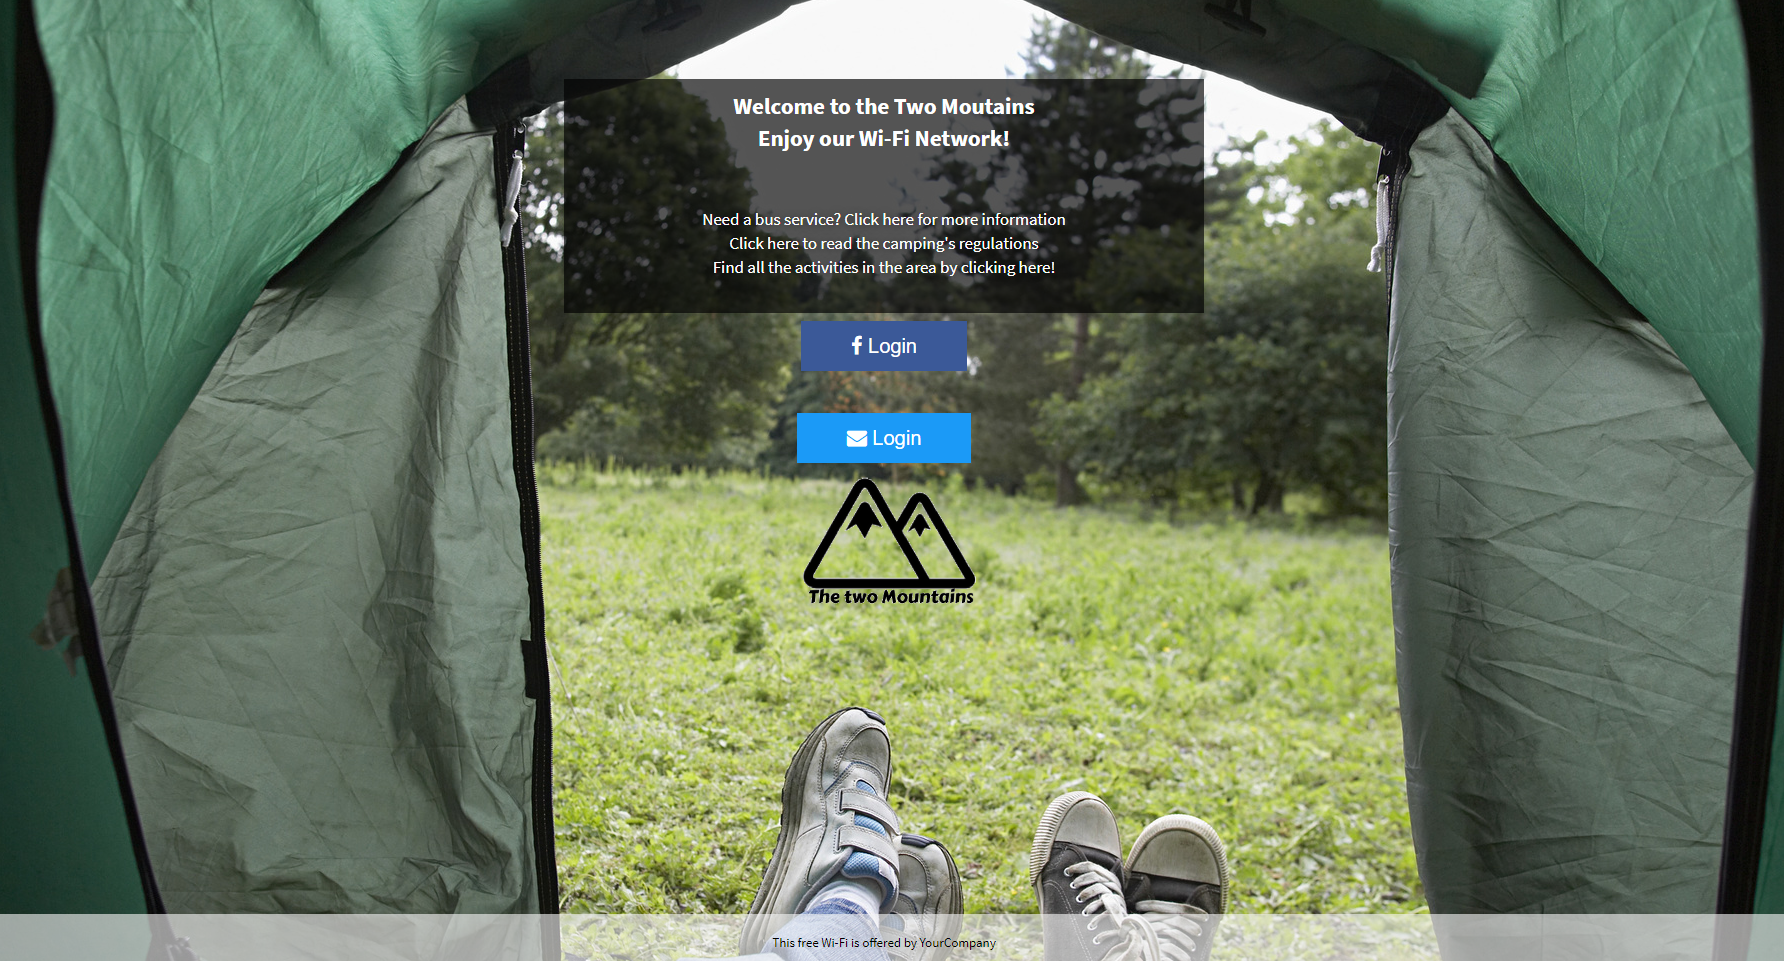 Wi-Fi network for Camping